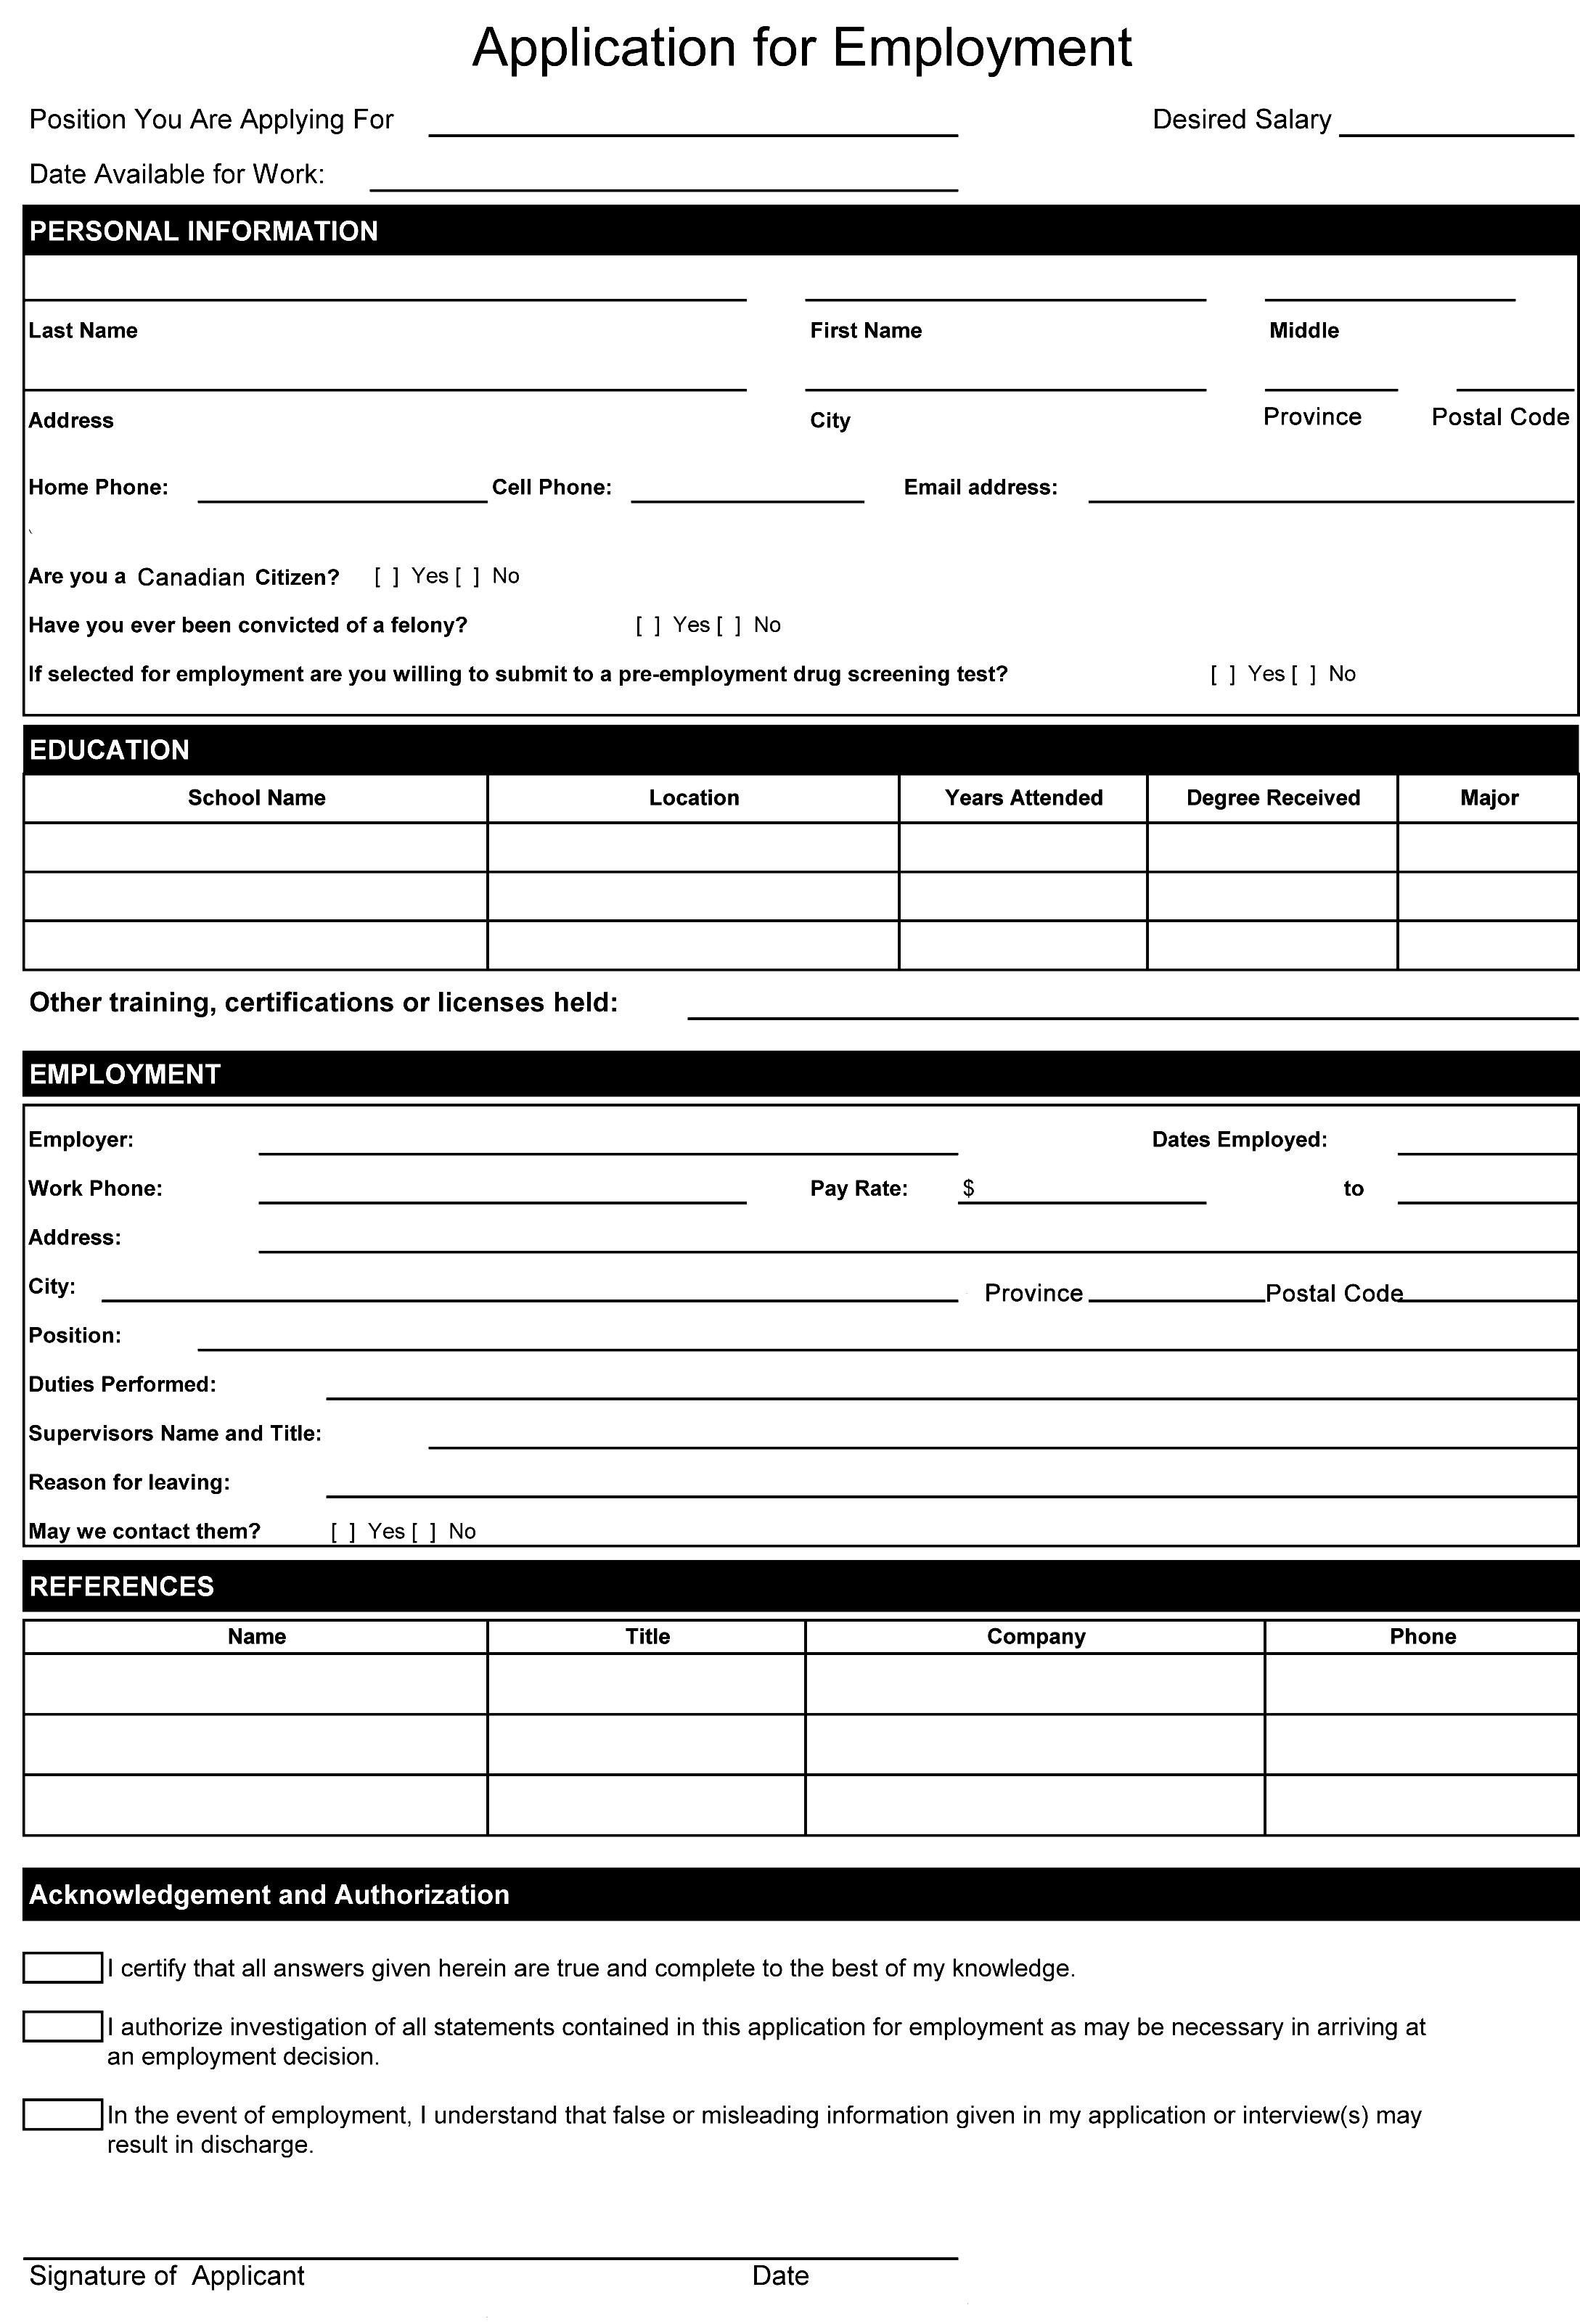 Resume Format Word Document | Resume Format | Job Application - Free Printable Application For Employment Template